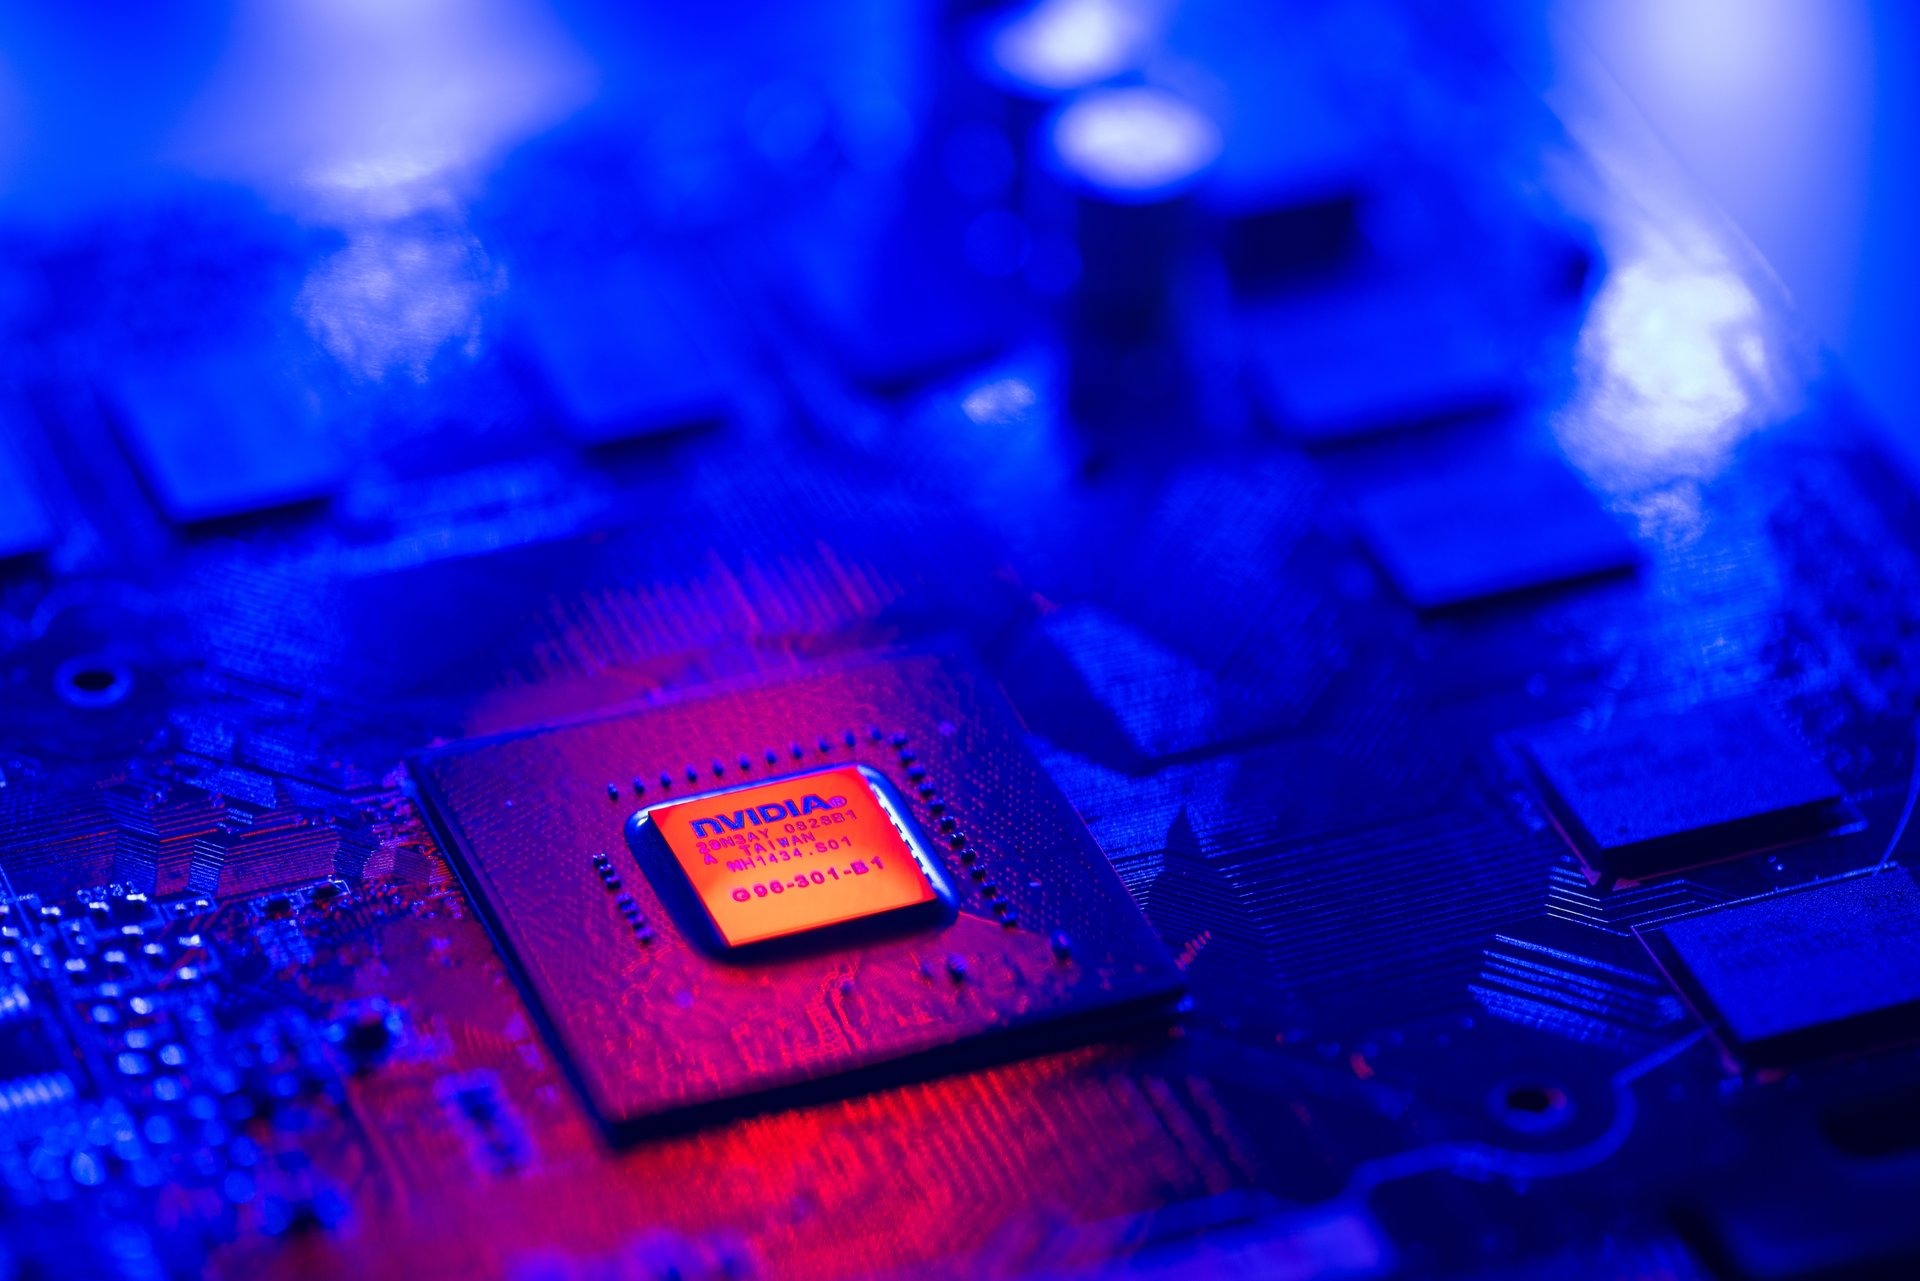 Computer chip board in blue light with an NVIDIA chip in the middle lit up orange.